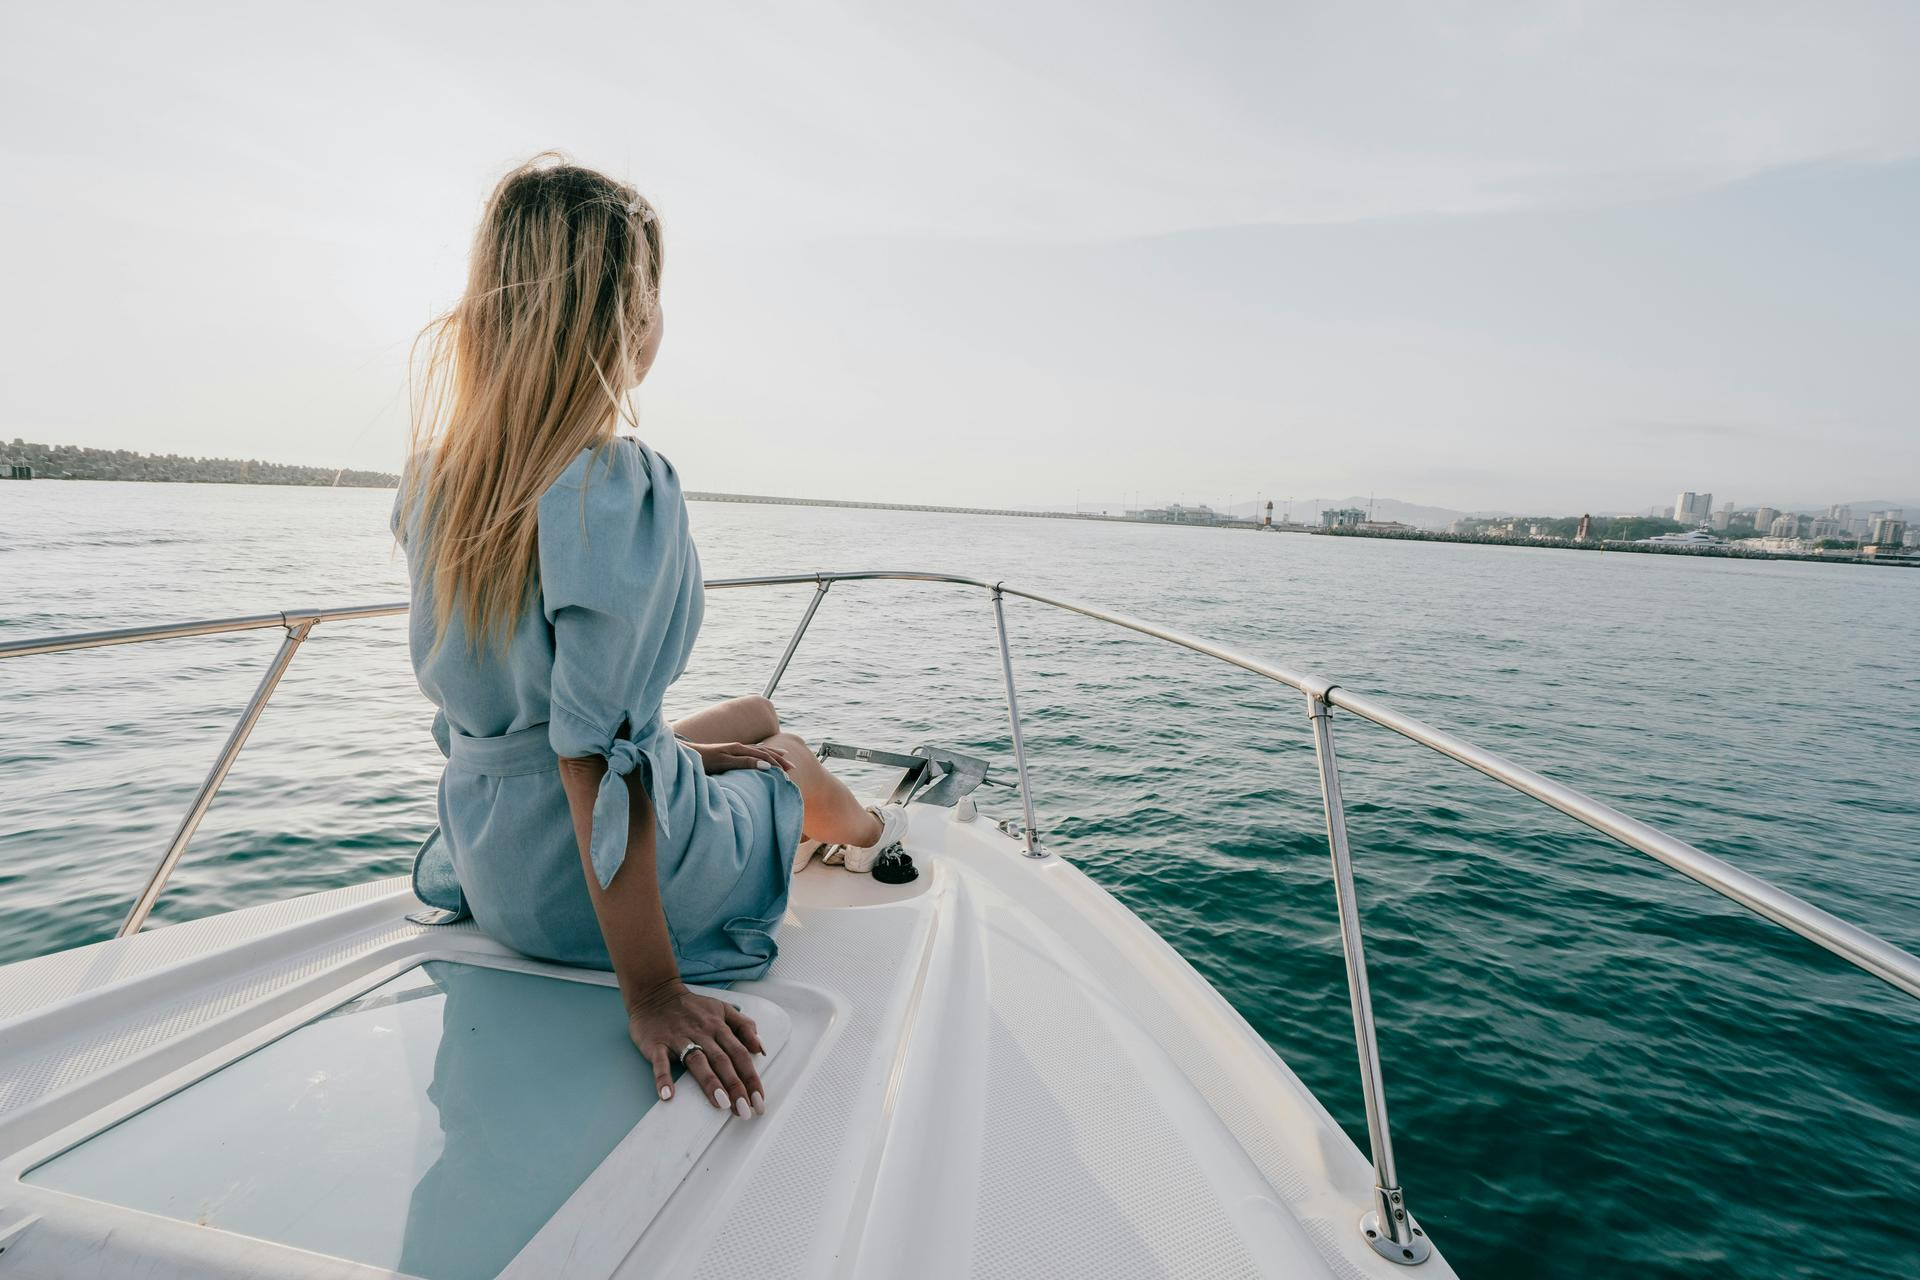 Staying connected when there’s no wi-fi at sea